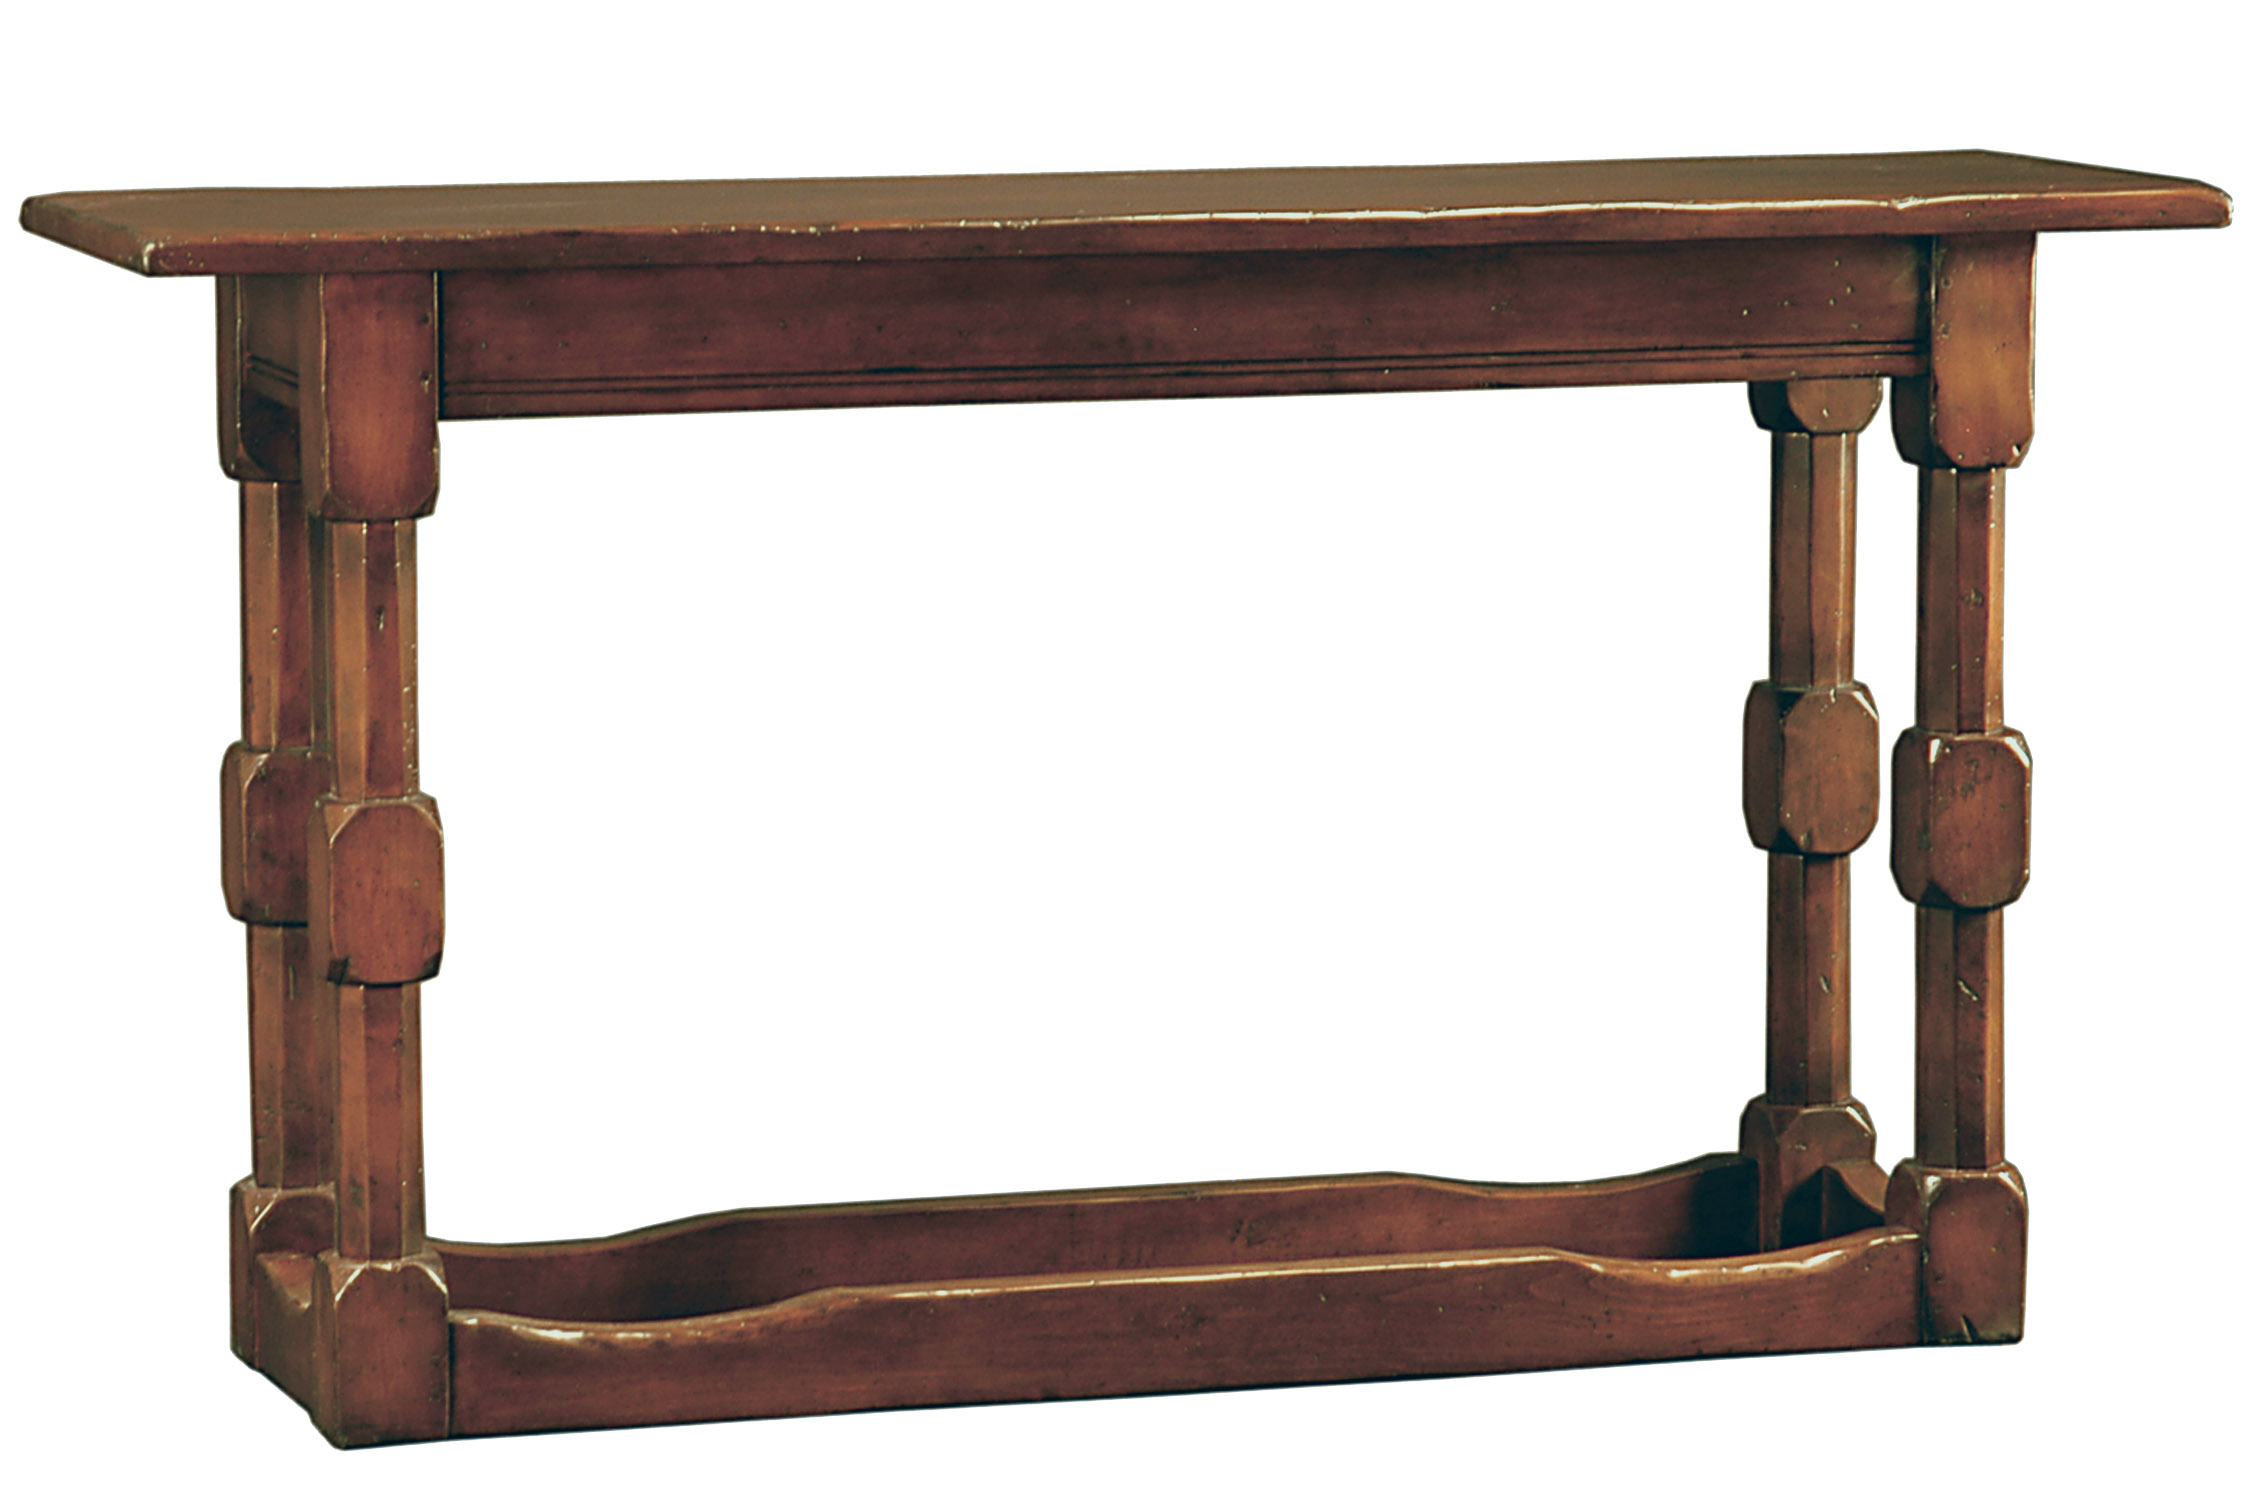 Wentworth traditional sofa table console by Woodland furniture in Idaho Falls